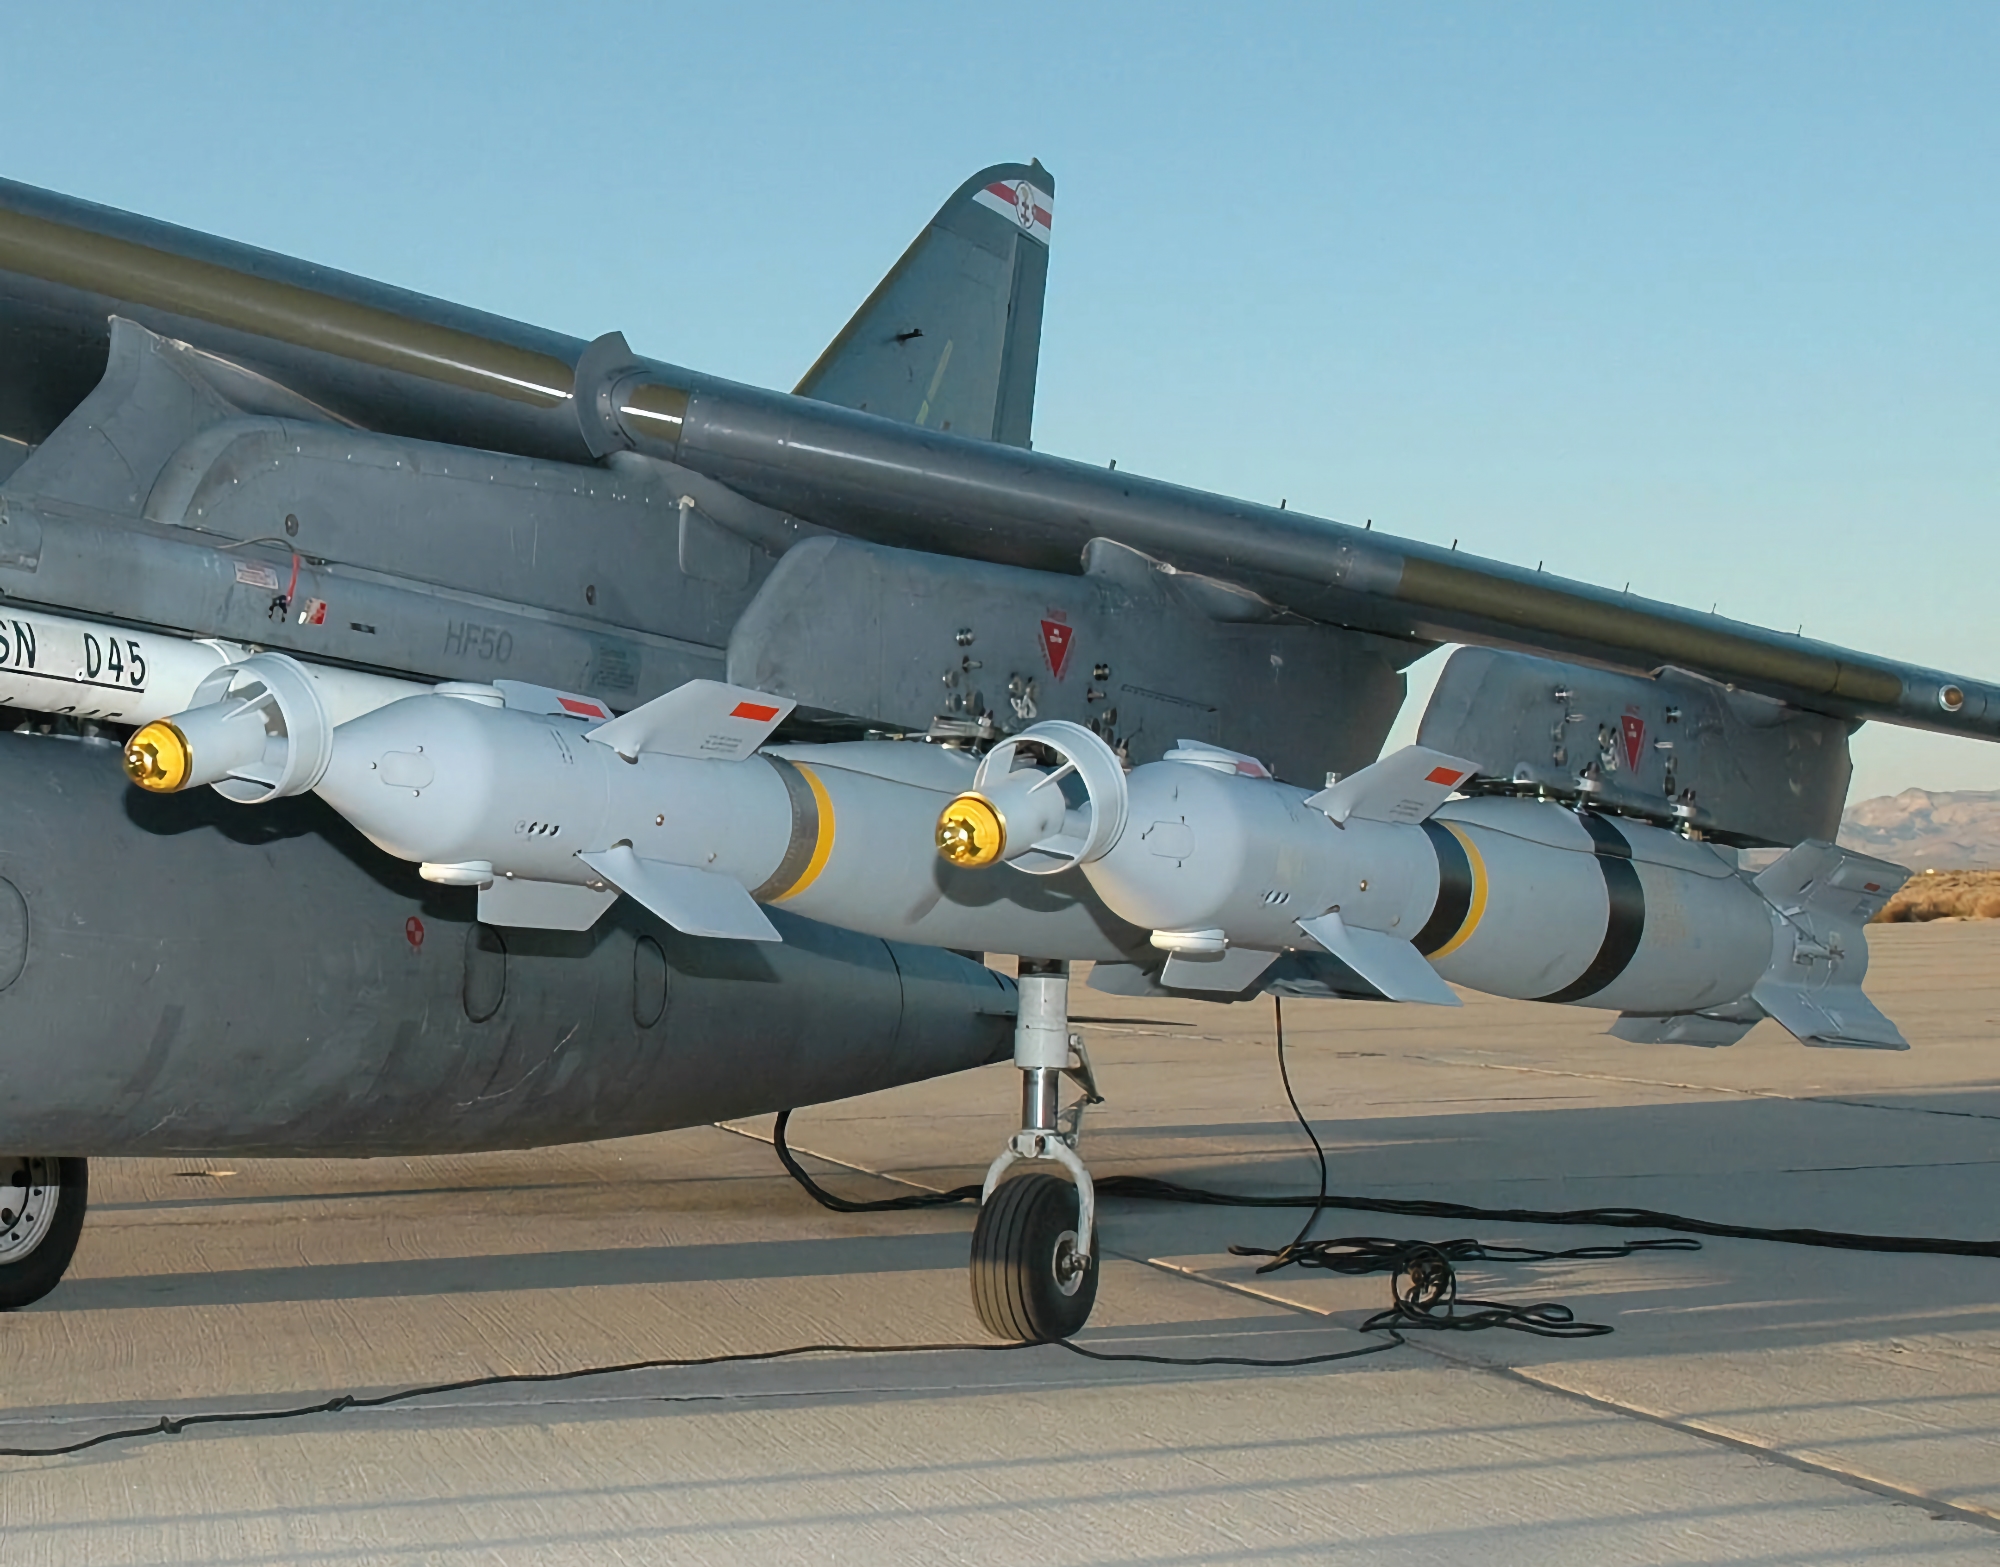 UK to send Ukraine Paveway IV laser-guided aerial bombs with a target engagement range of 30 km